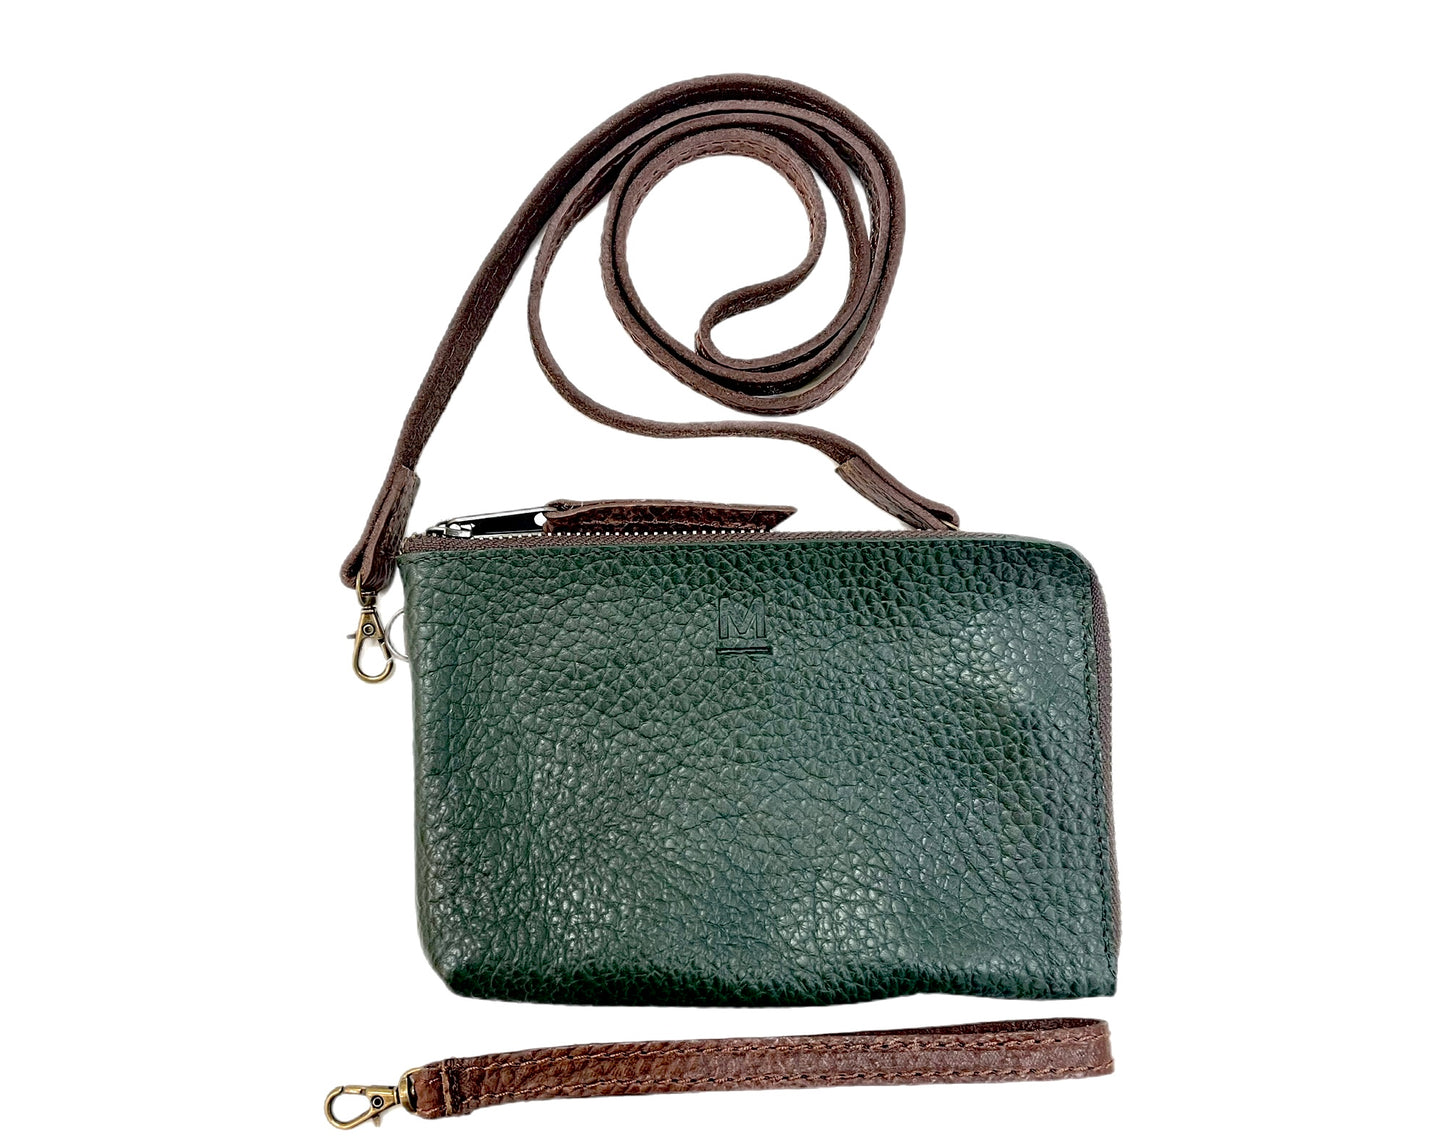 Wristlet Leather Bag With Strap